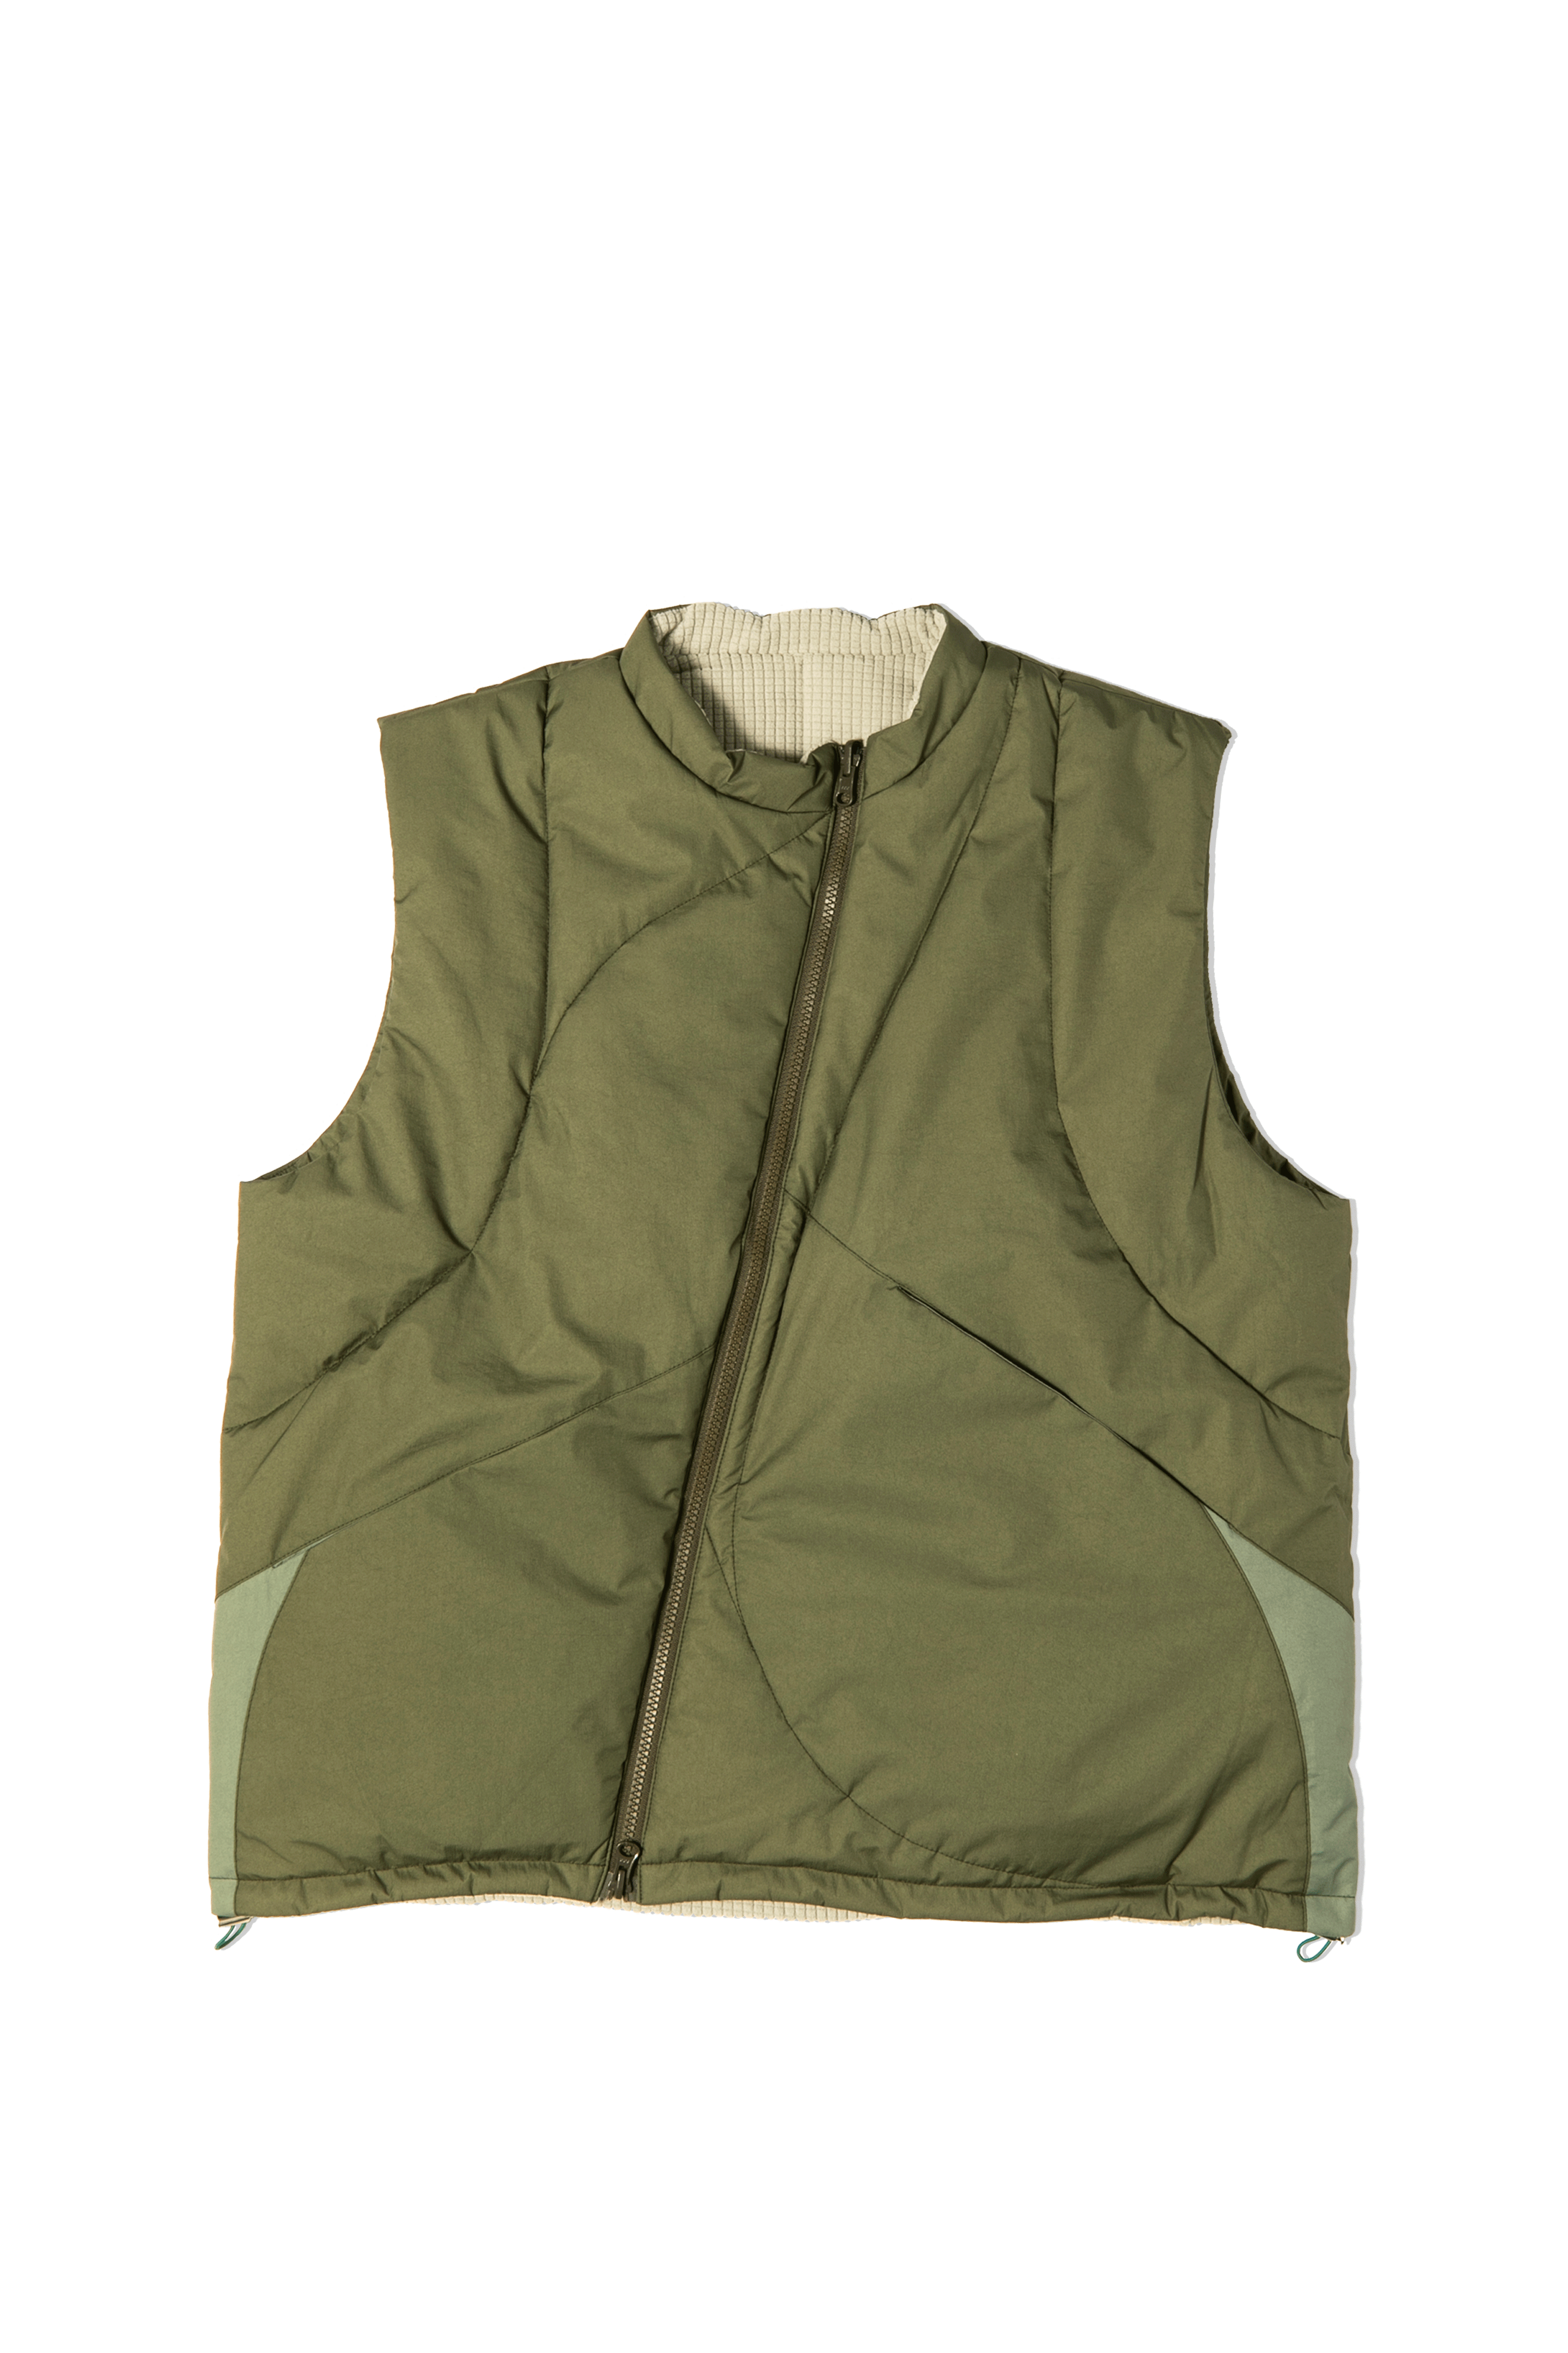 3M Thinsulate Insulated Reversible Vest